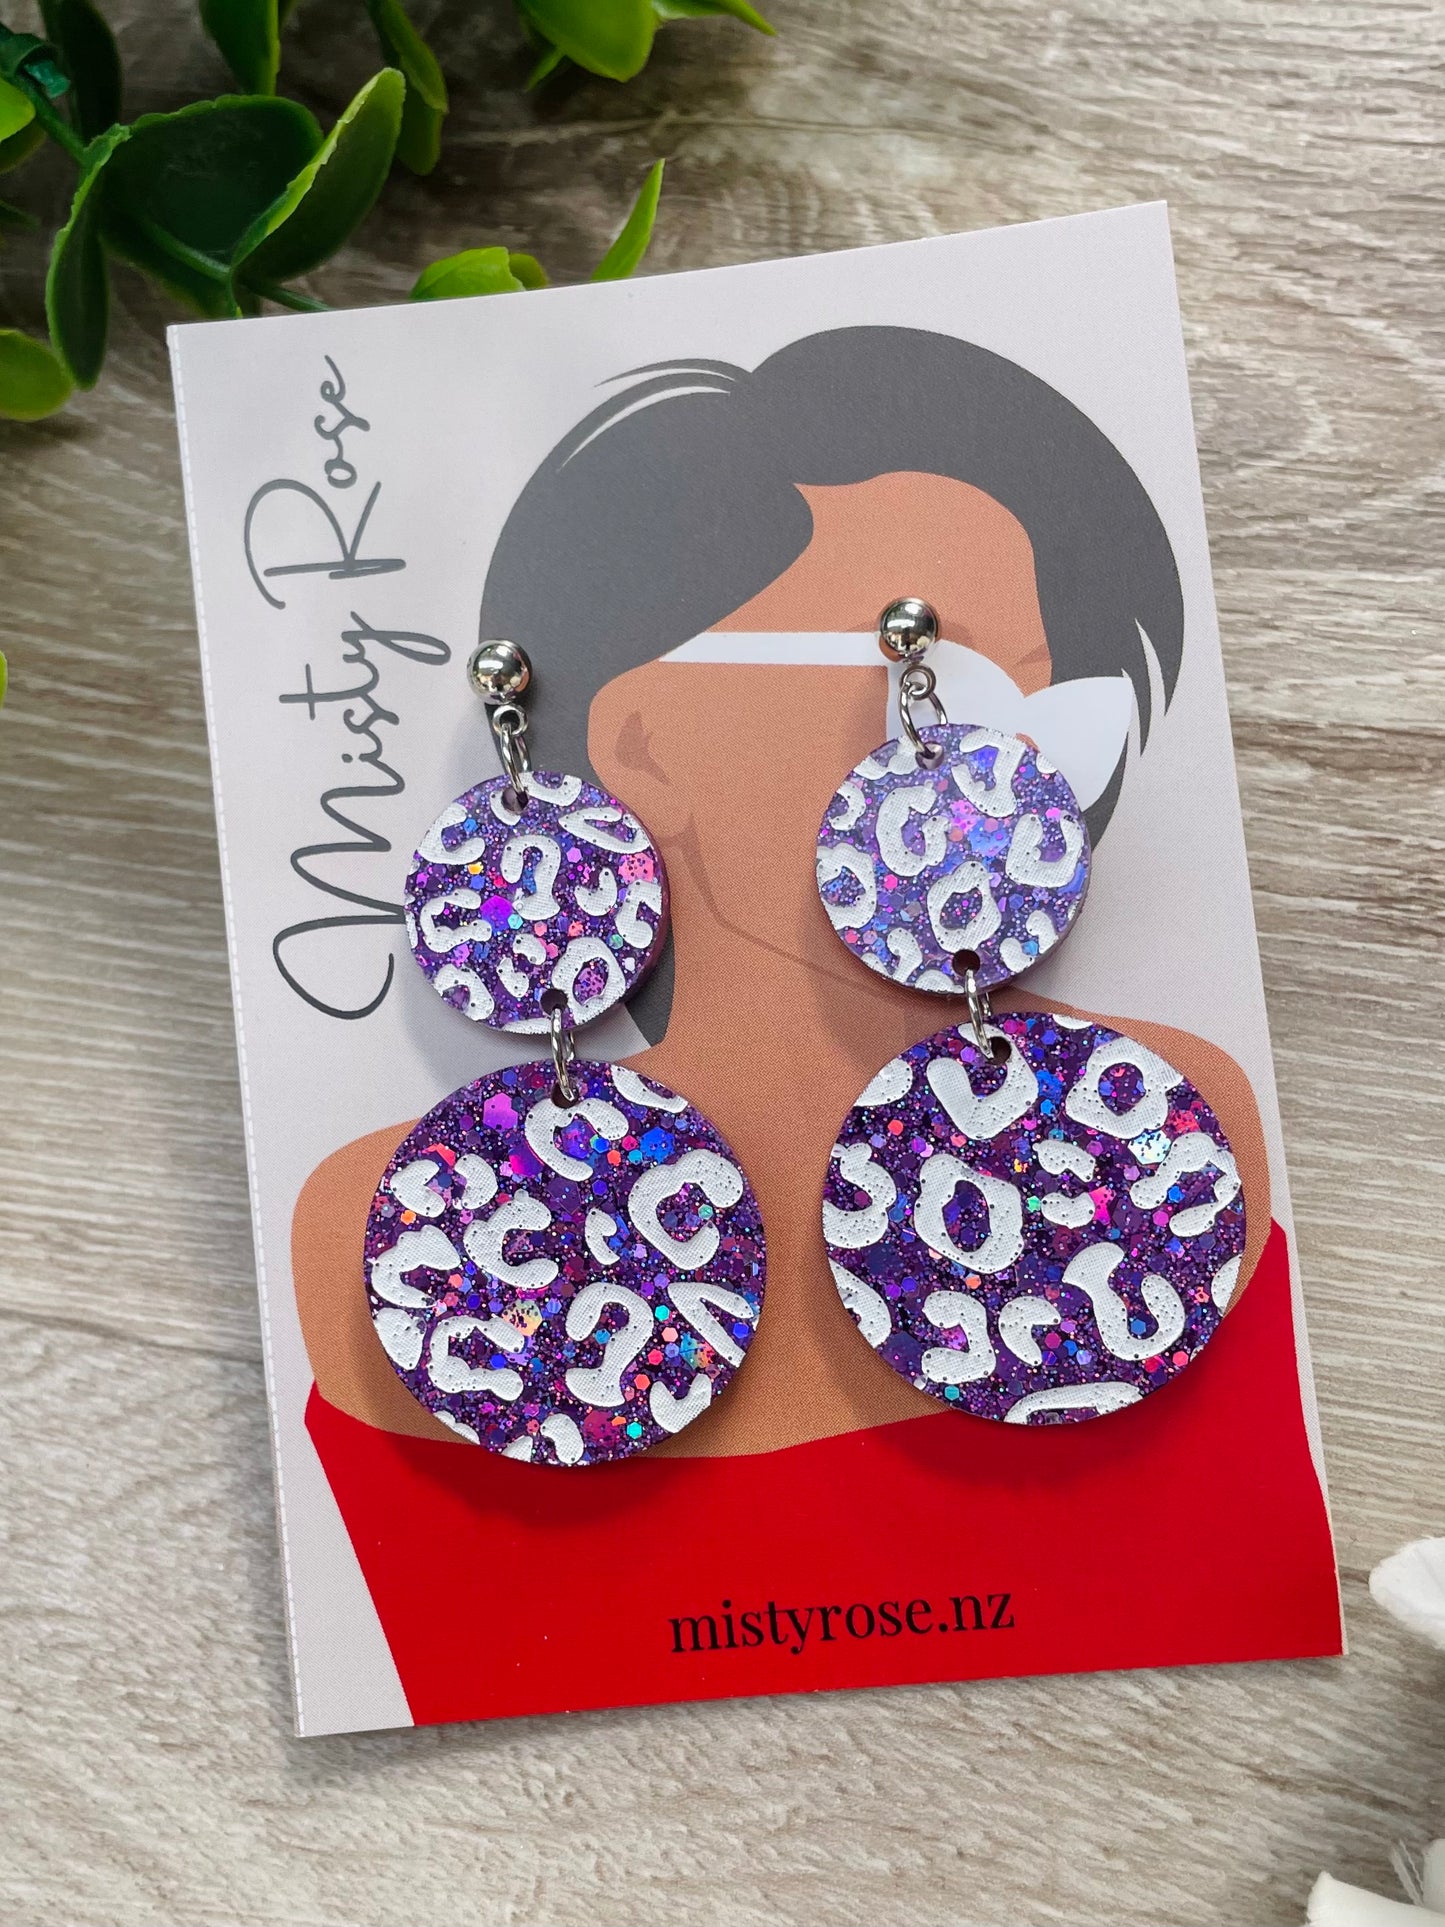 Leopard double circle earrings 🐆🐆  Gorgeous purple holographic glitter with white animal / leopard print detailing 💜  These fun, lightweight earrings are sure to add some sparkle to any look!  Approx 3cm wide x 5cm long with ball stud topper